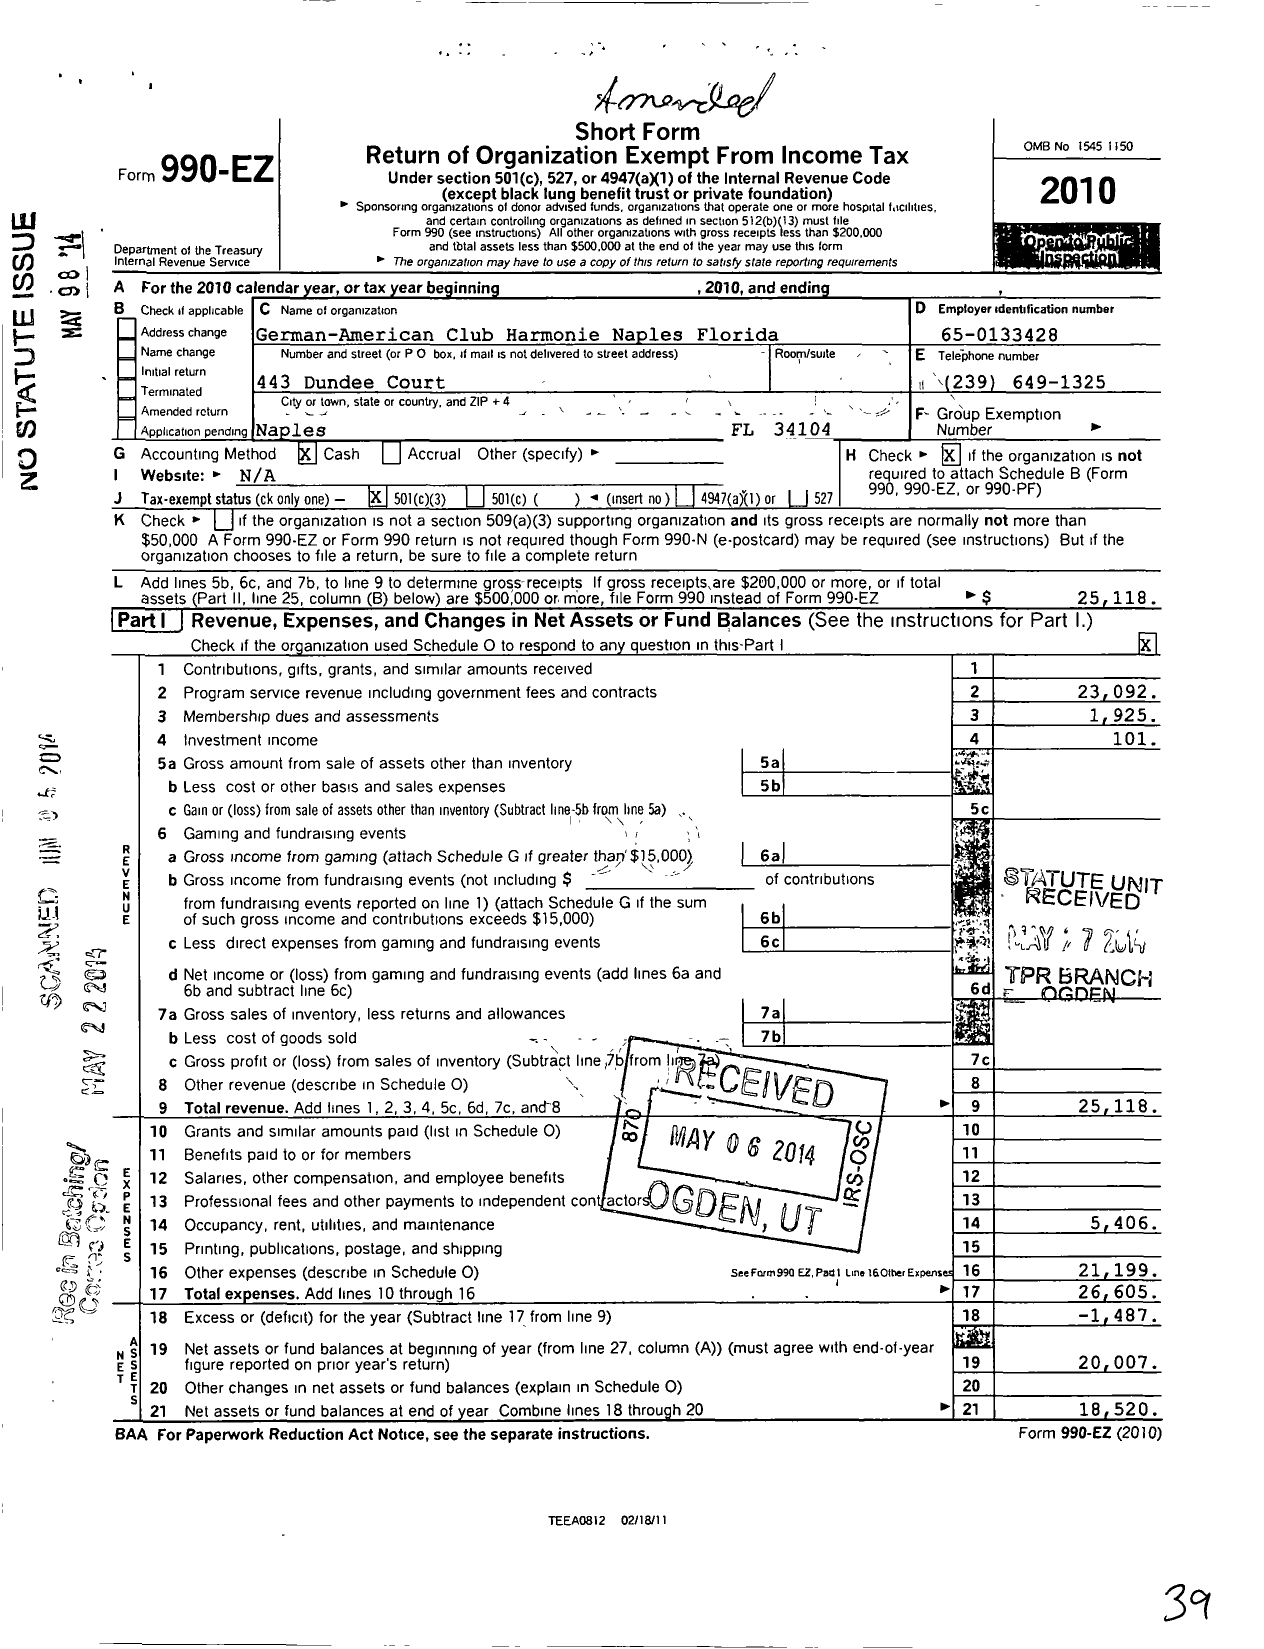 Image of first page of 2010 Form 990EZ for German-American Club Harmonie Naples Florida